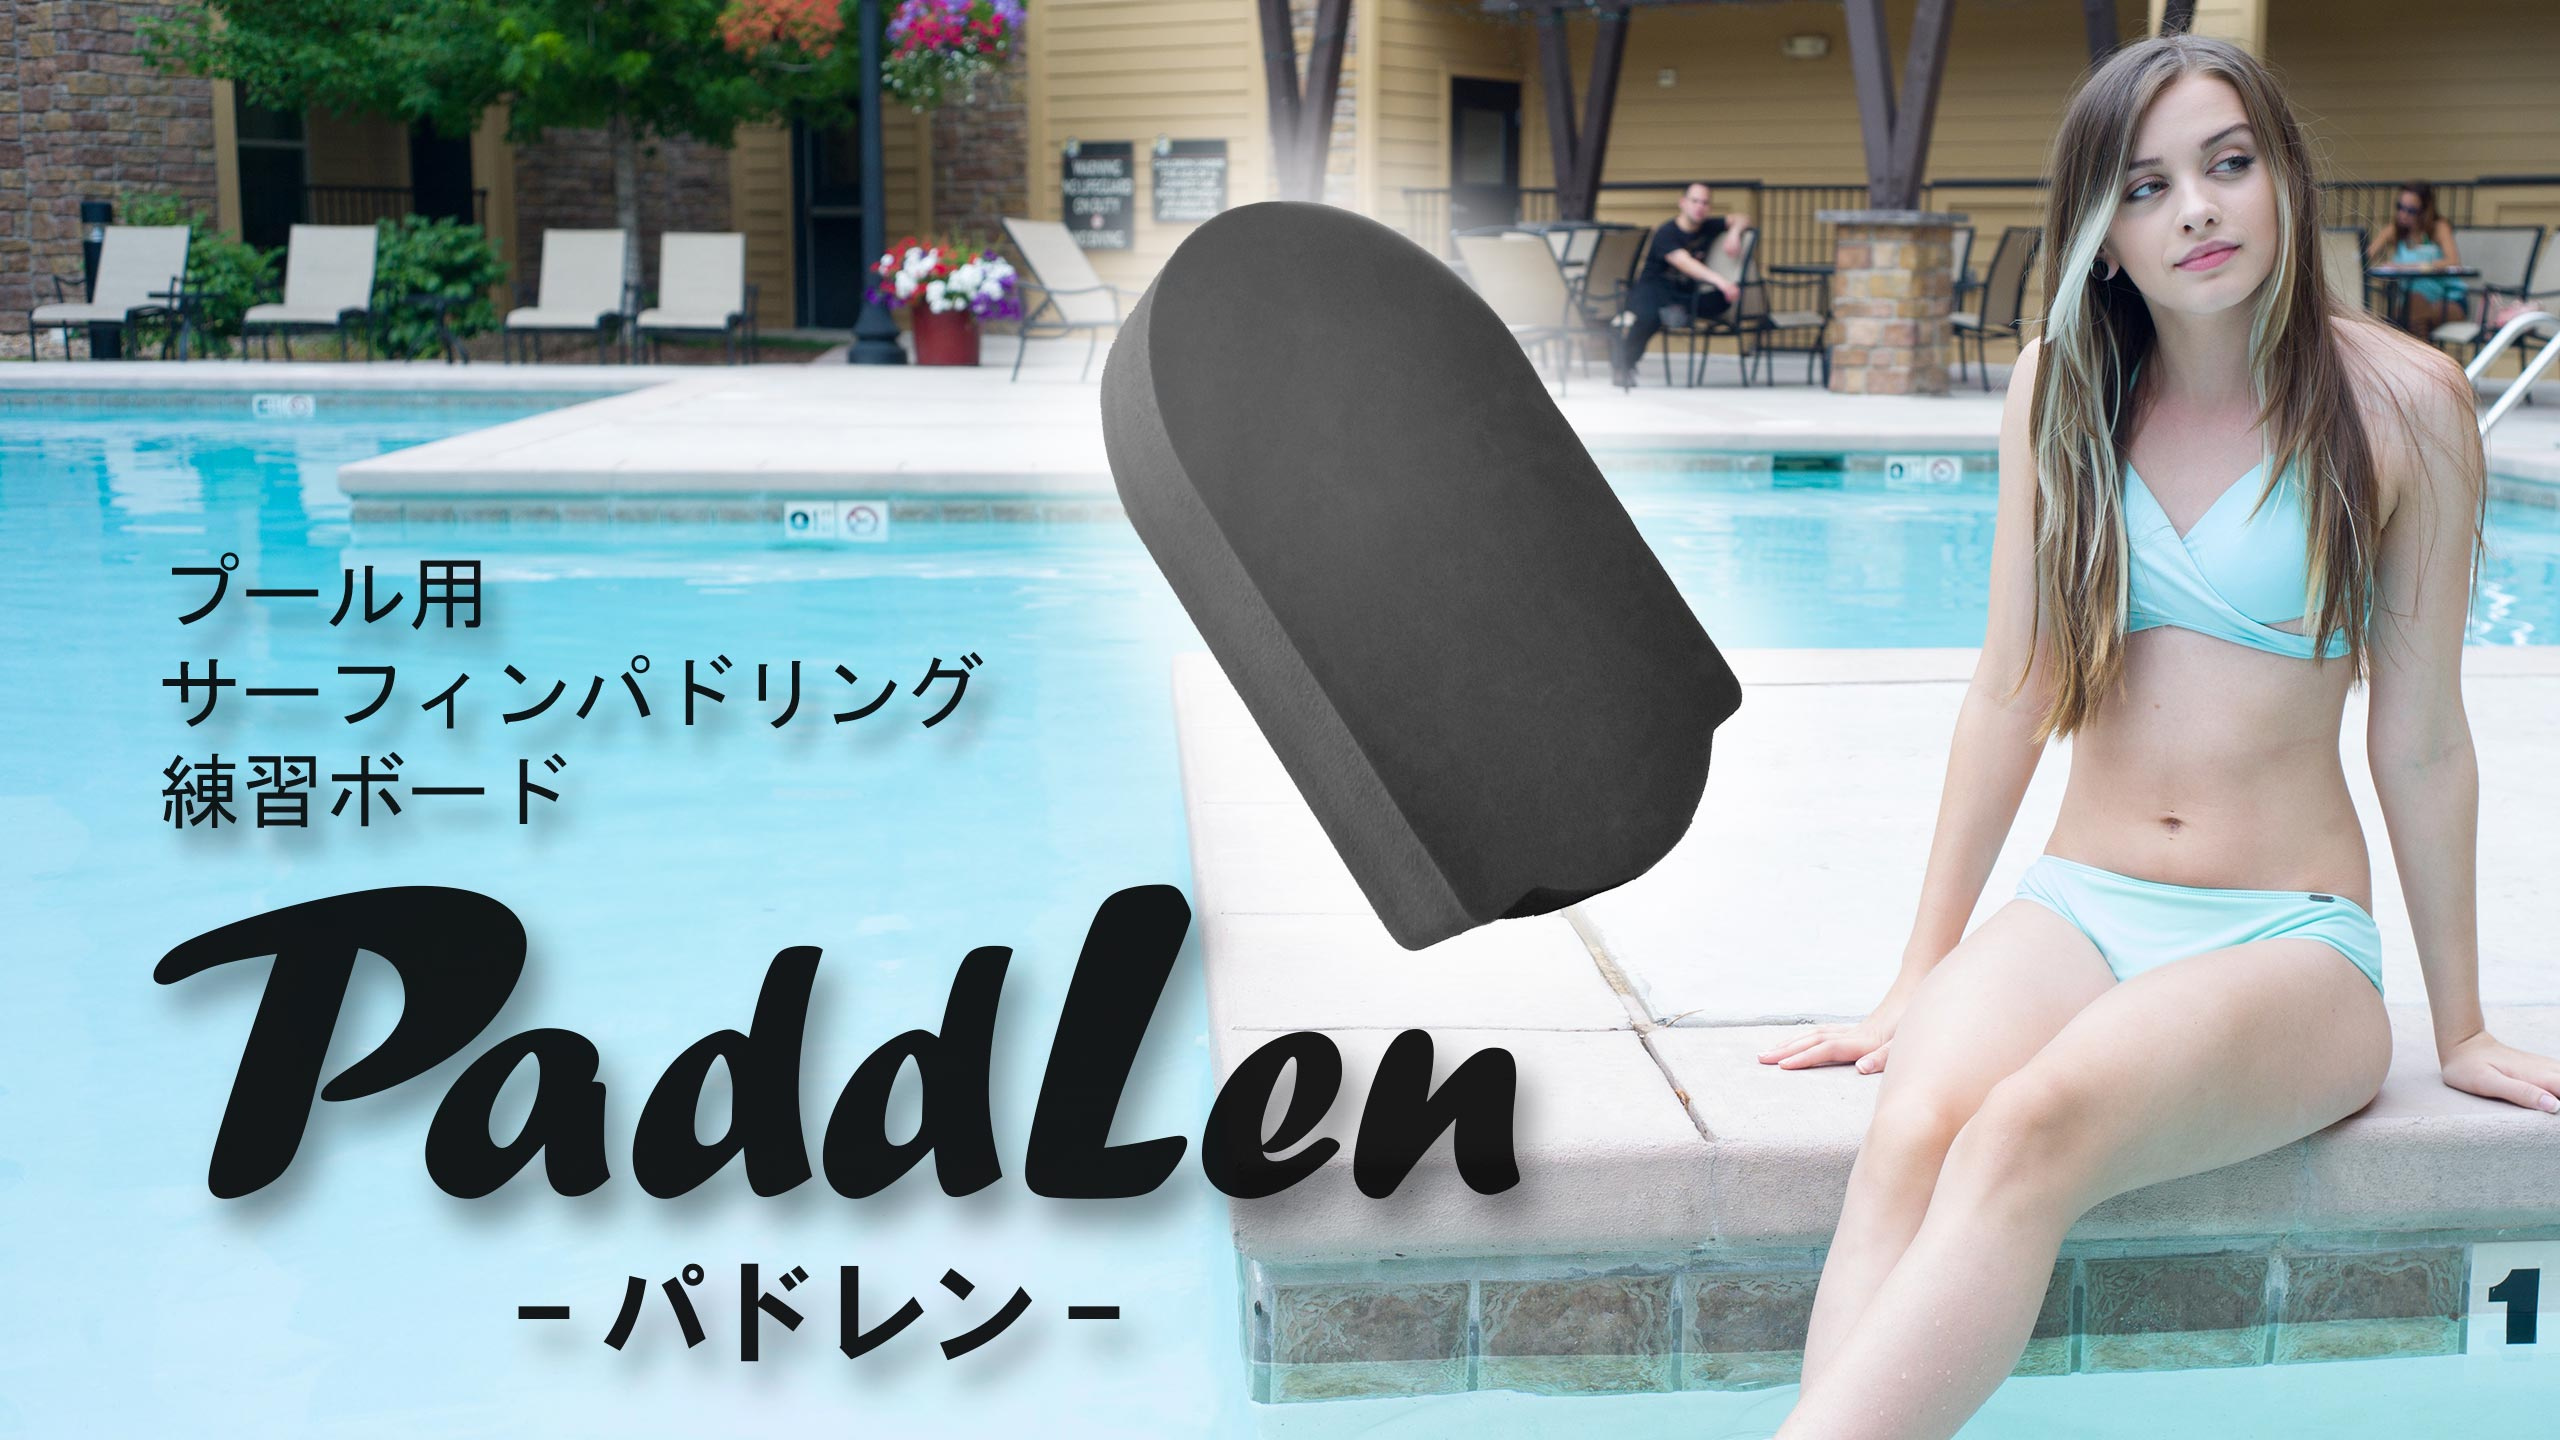 Paddlen – PLUSYS PRODUCTS